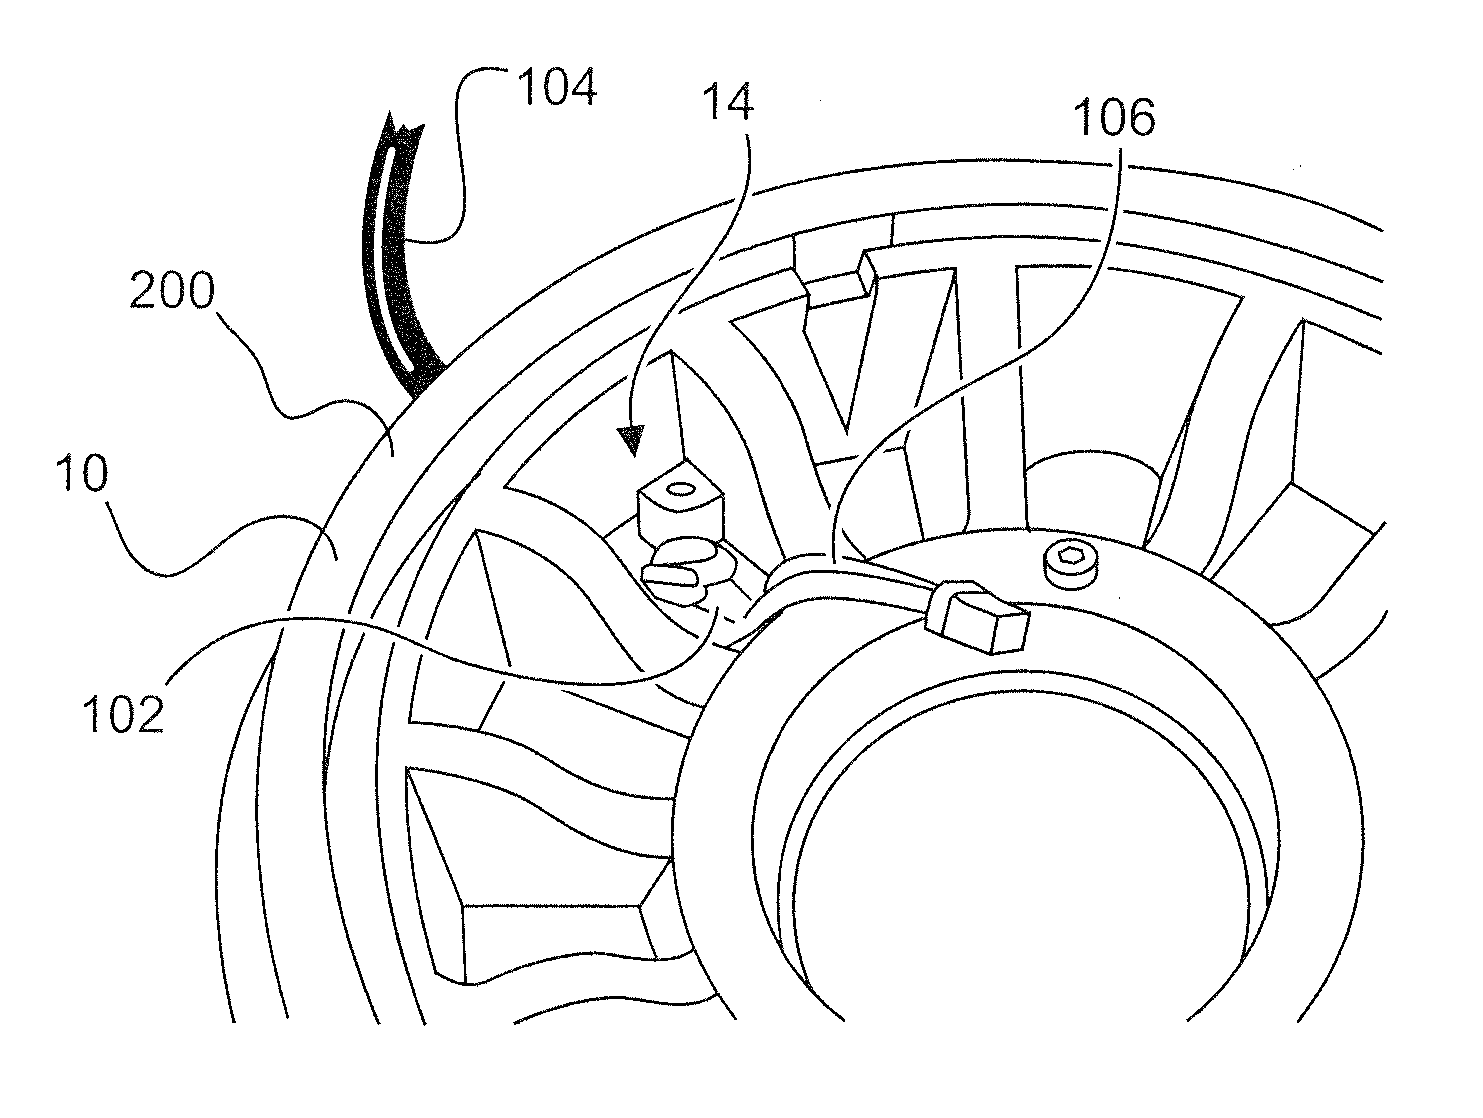 Air-Tight connection system for electronic systems